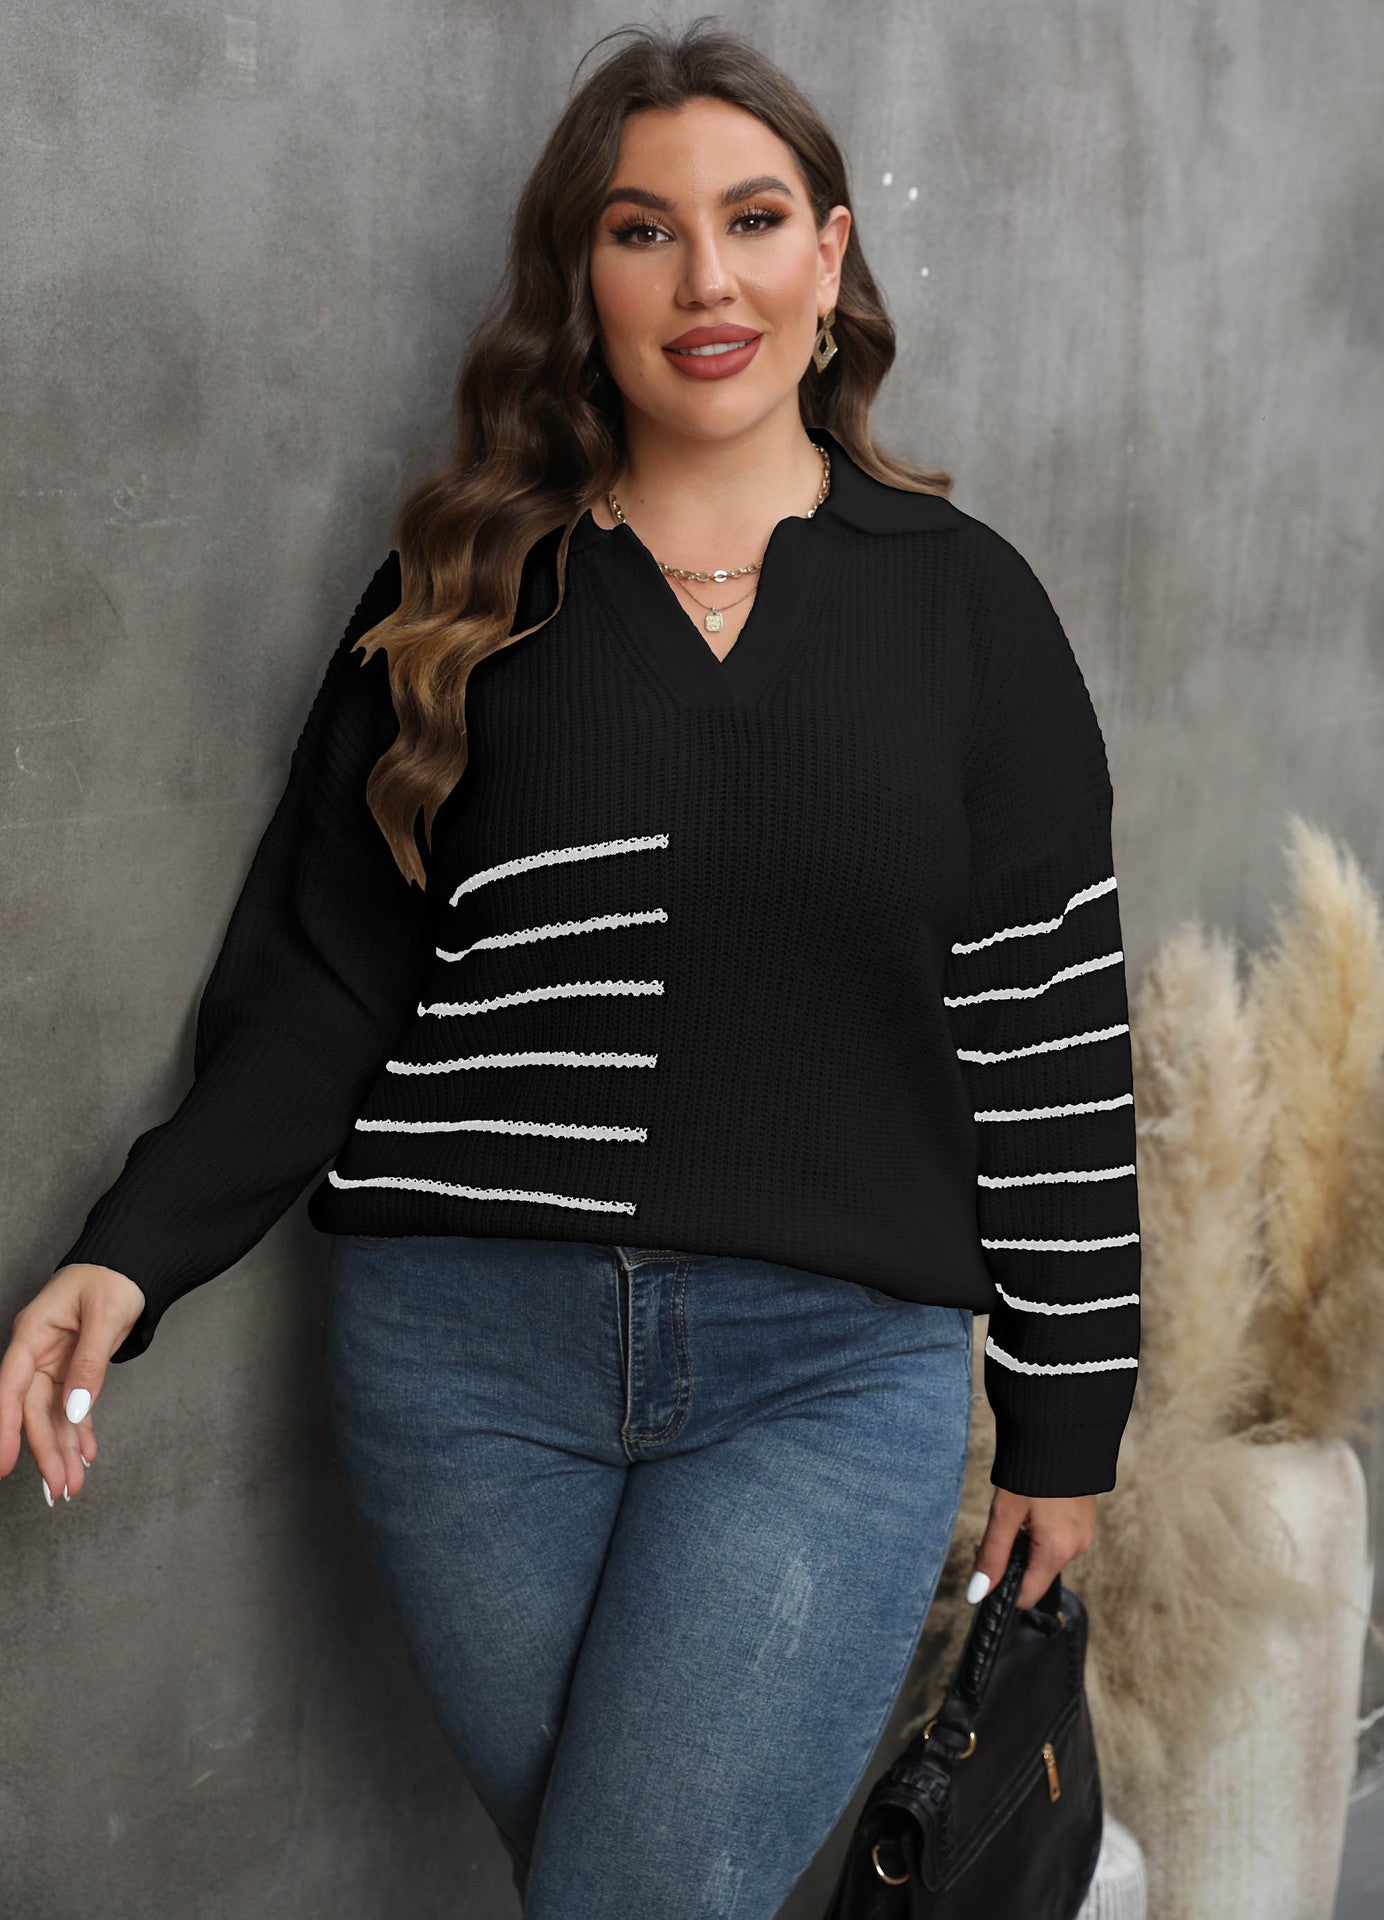 BamBam Ladies Pullover Knit Top Plus Size Women's Fall Winter Contrasting Color Patchwork Striped Turndowm Collar Sweater - BamBam